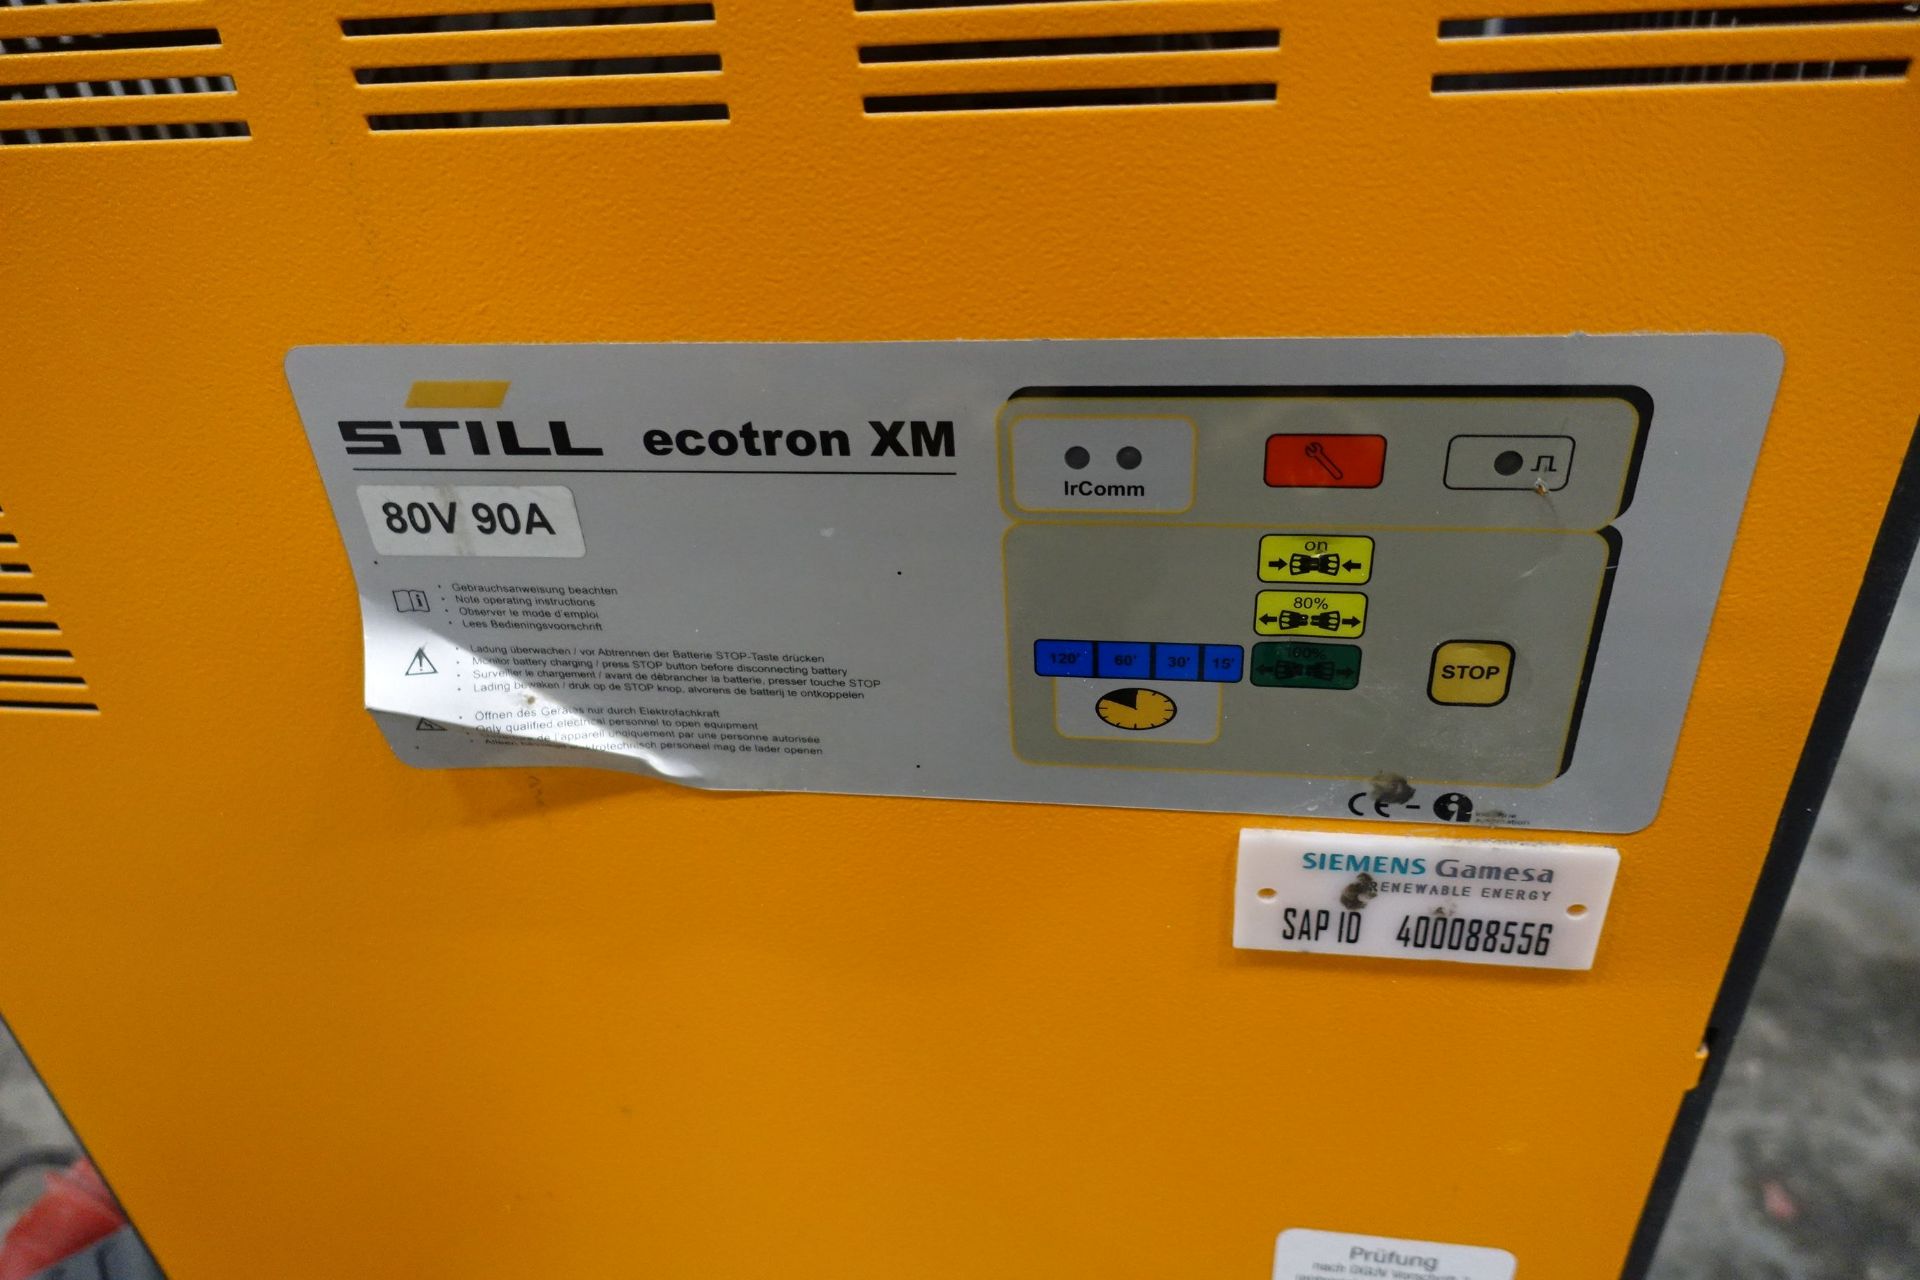 STILL Ecoton XM Electric Truck Battery Charger, 80V, 90A, (2017) - Image 3 of 6